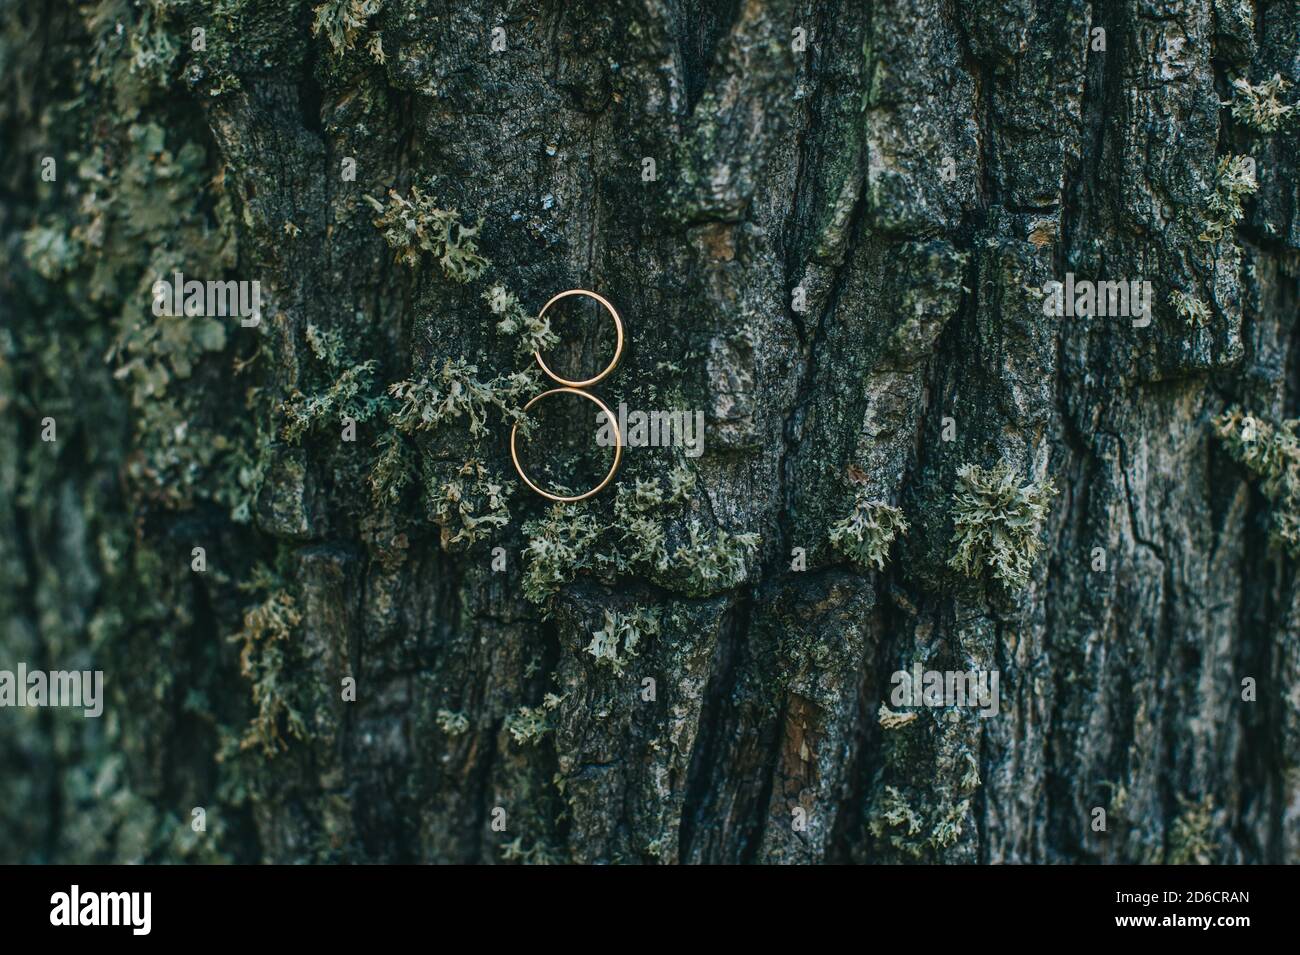 Wedding photography. Close up wedding rings lie on the bark of a tree. Stock Photo